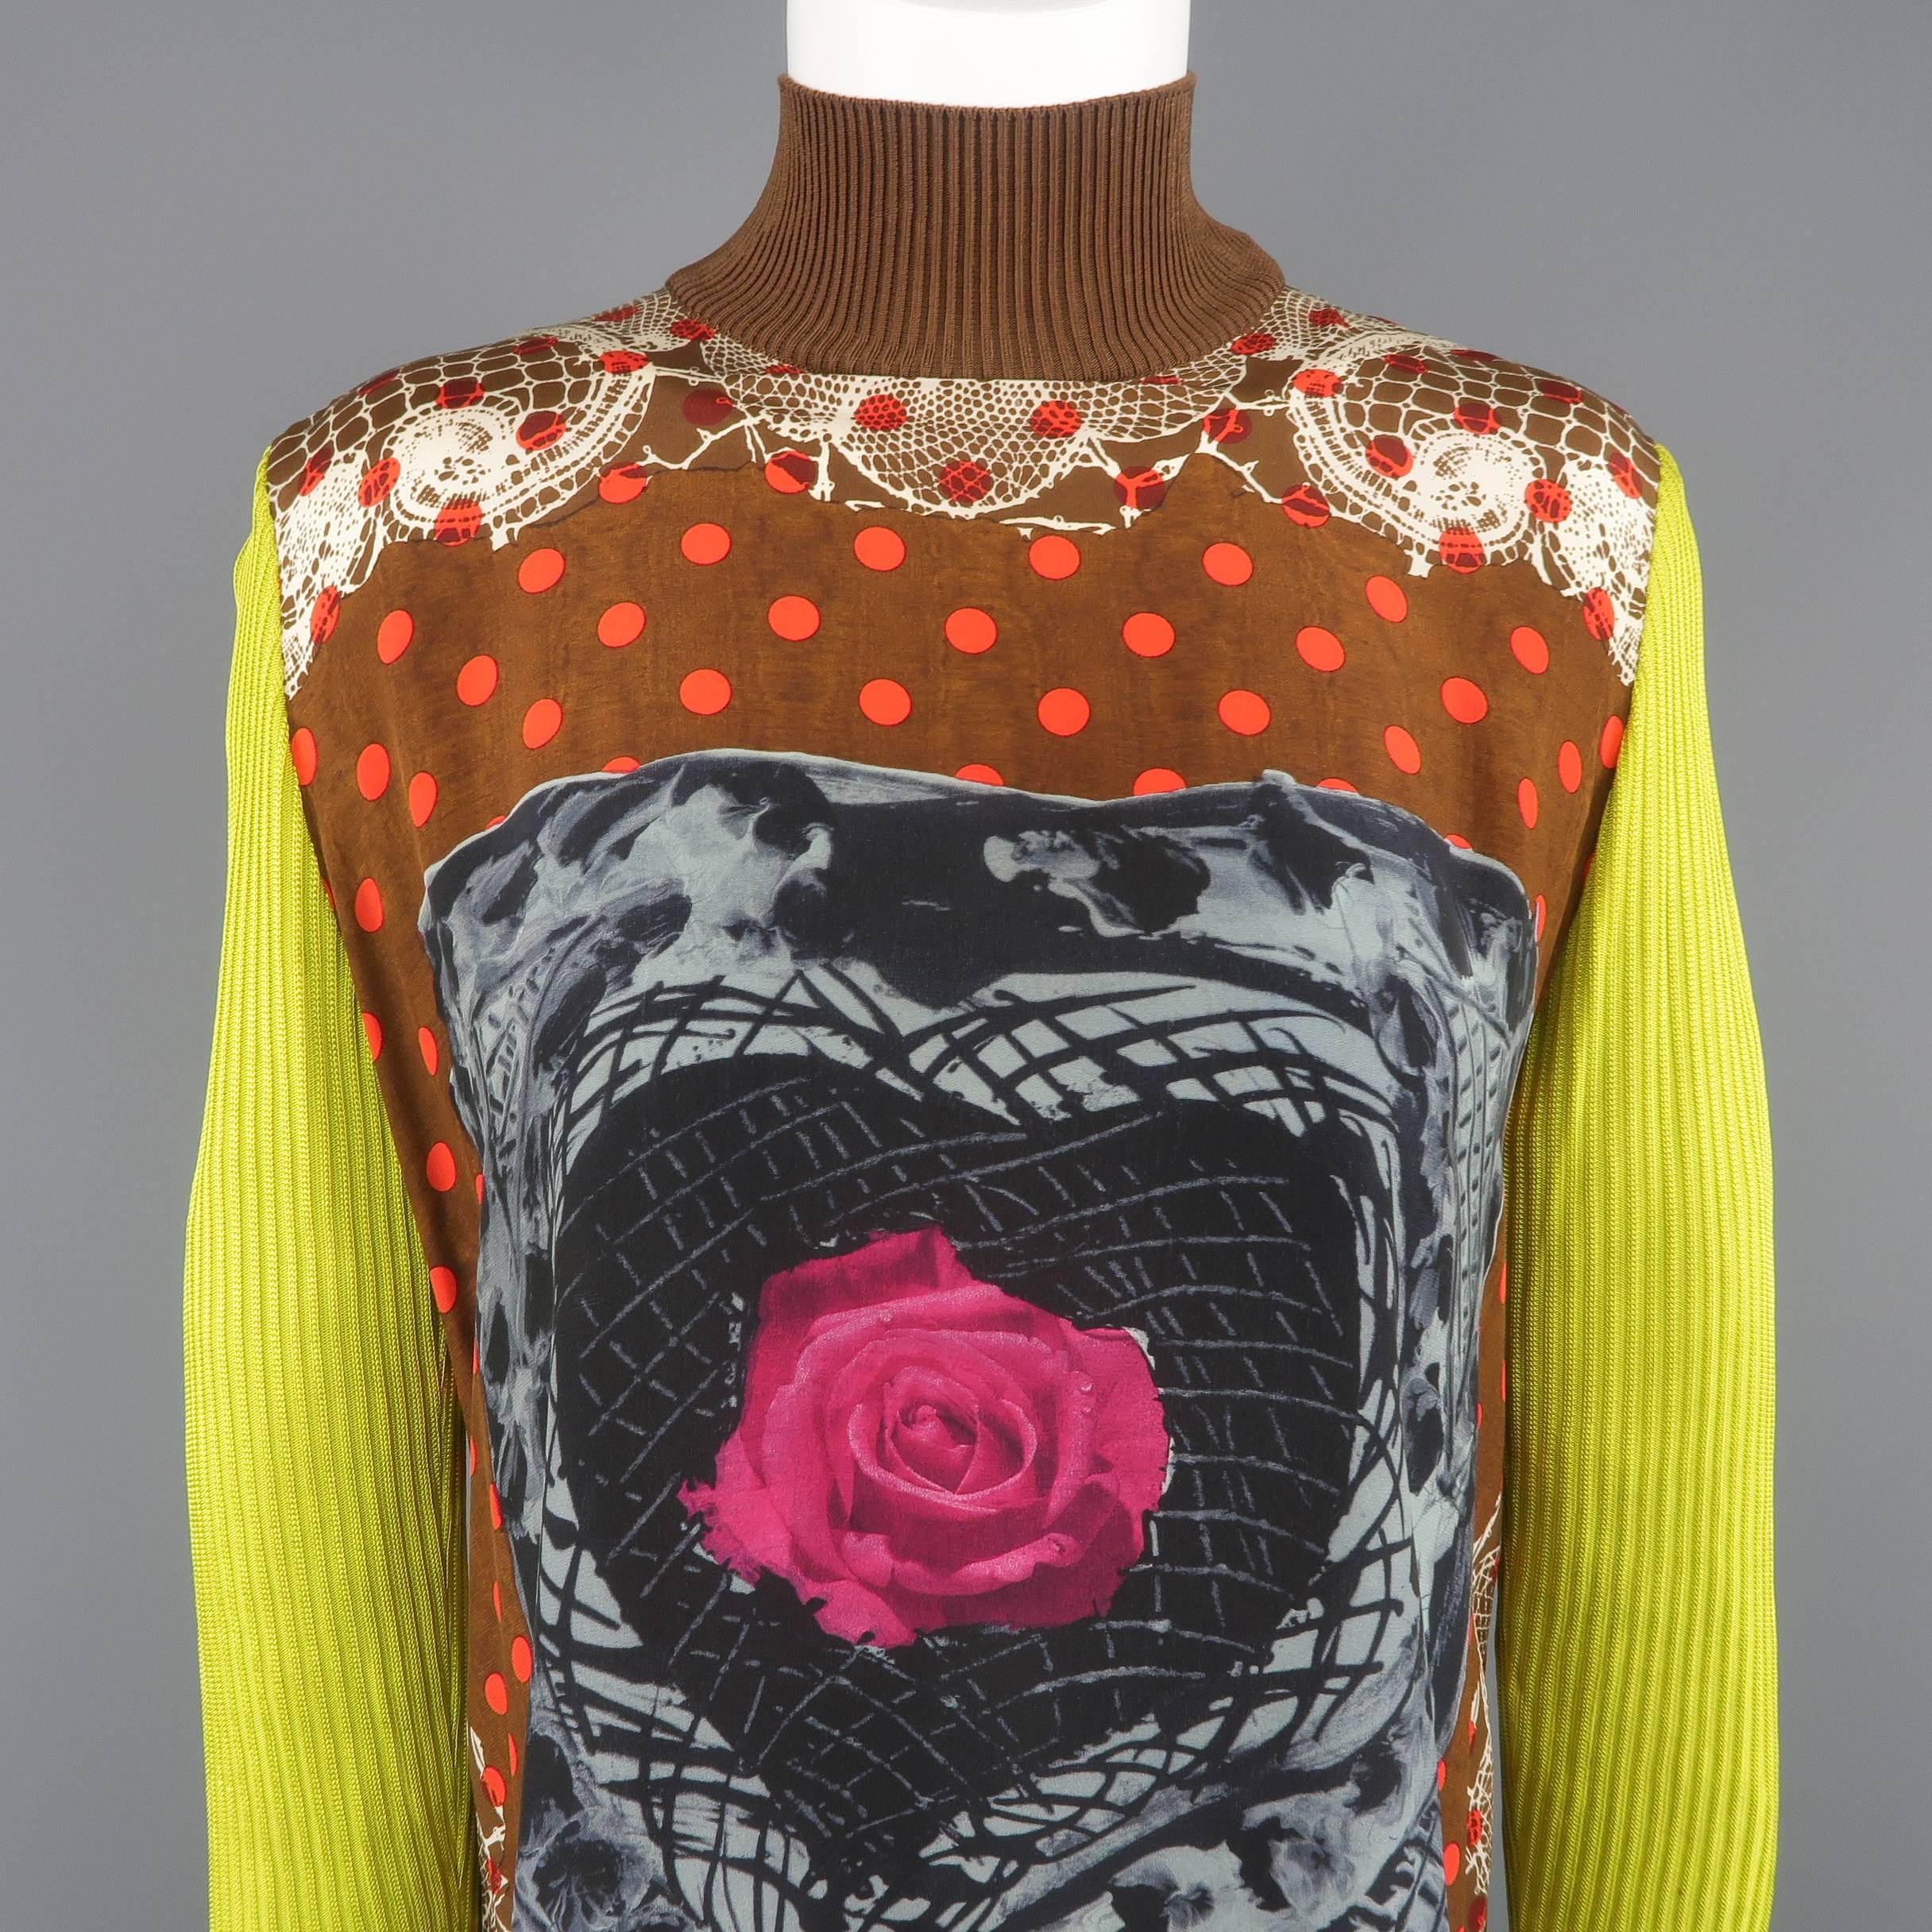 Vintage Christian Lacroix top features a brown ribbed viscose knit turtleneck, neon green sleeves, long olive green back, and abstract brown and red polka dot front with blue and pink rose graphic. Made in Italy.
 
Good Pre-Owned Condition.
Marked: